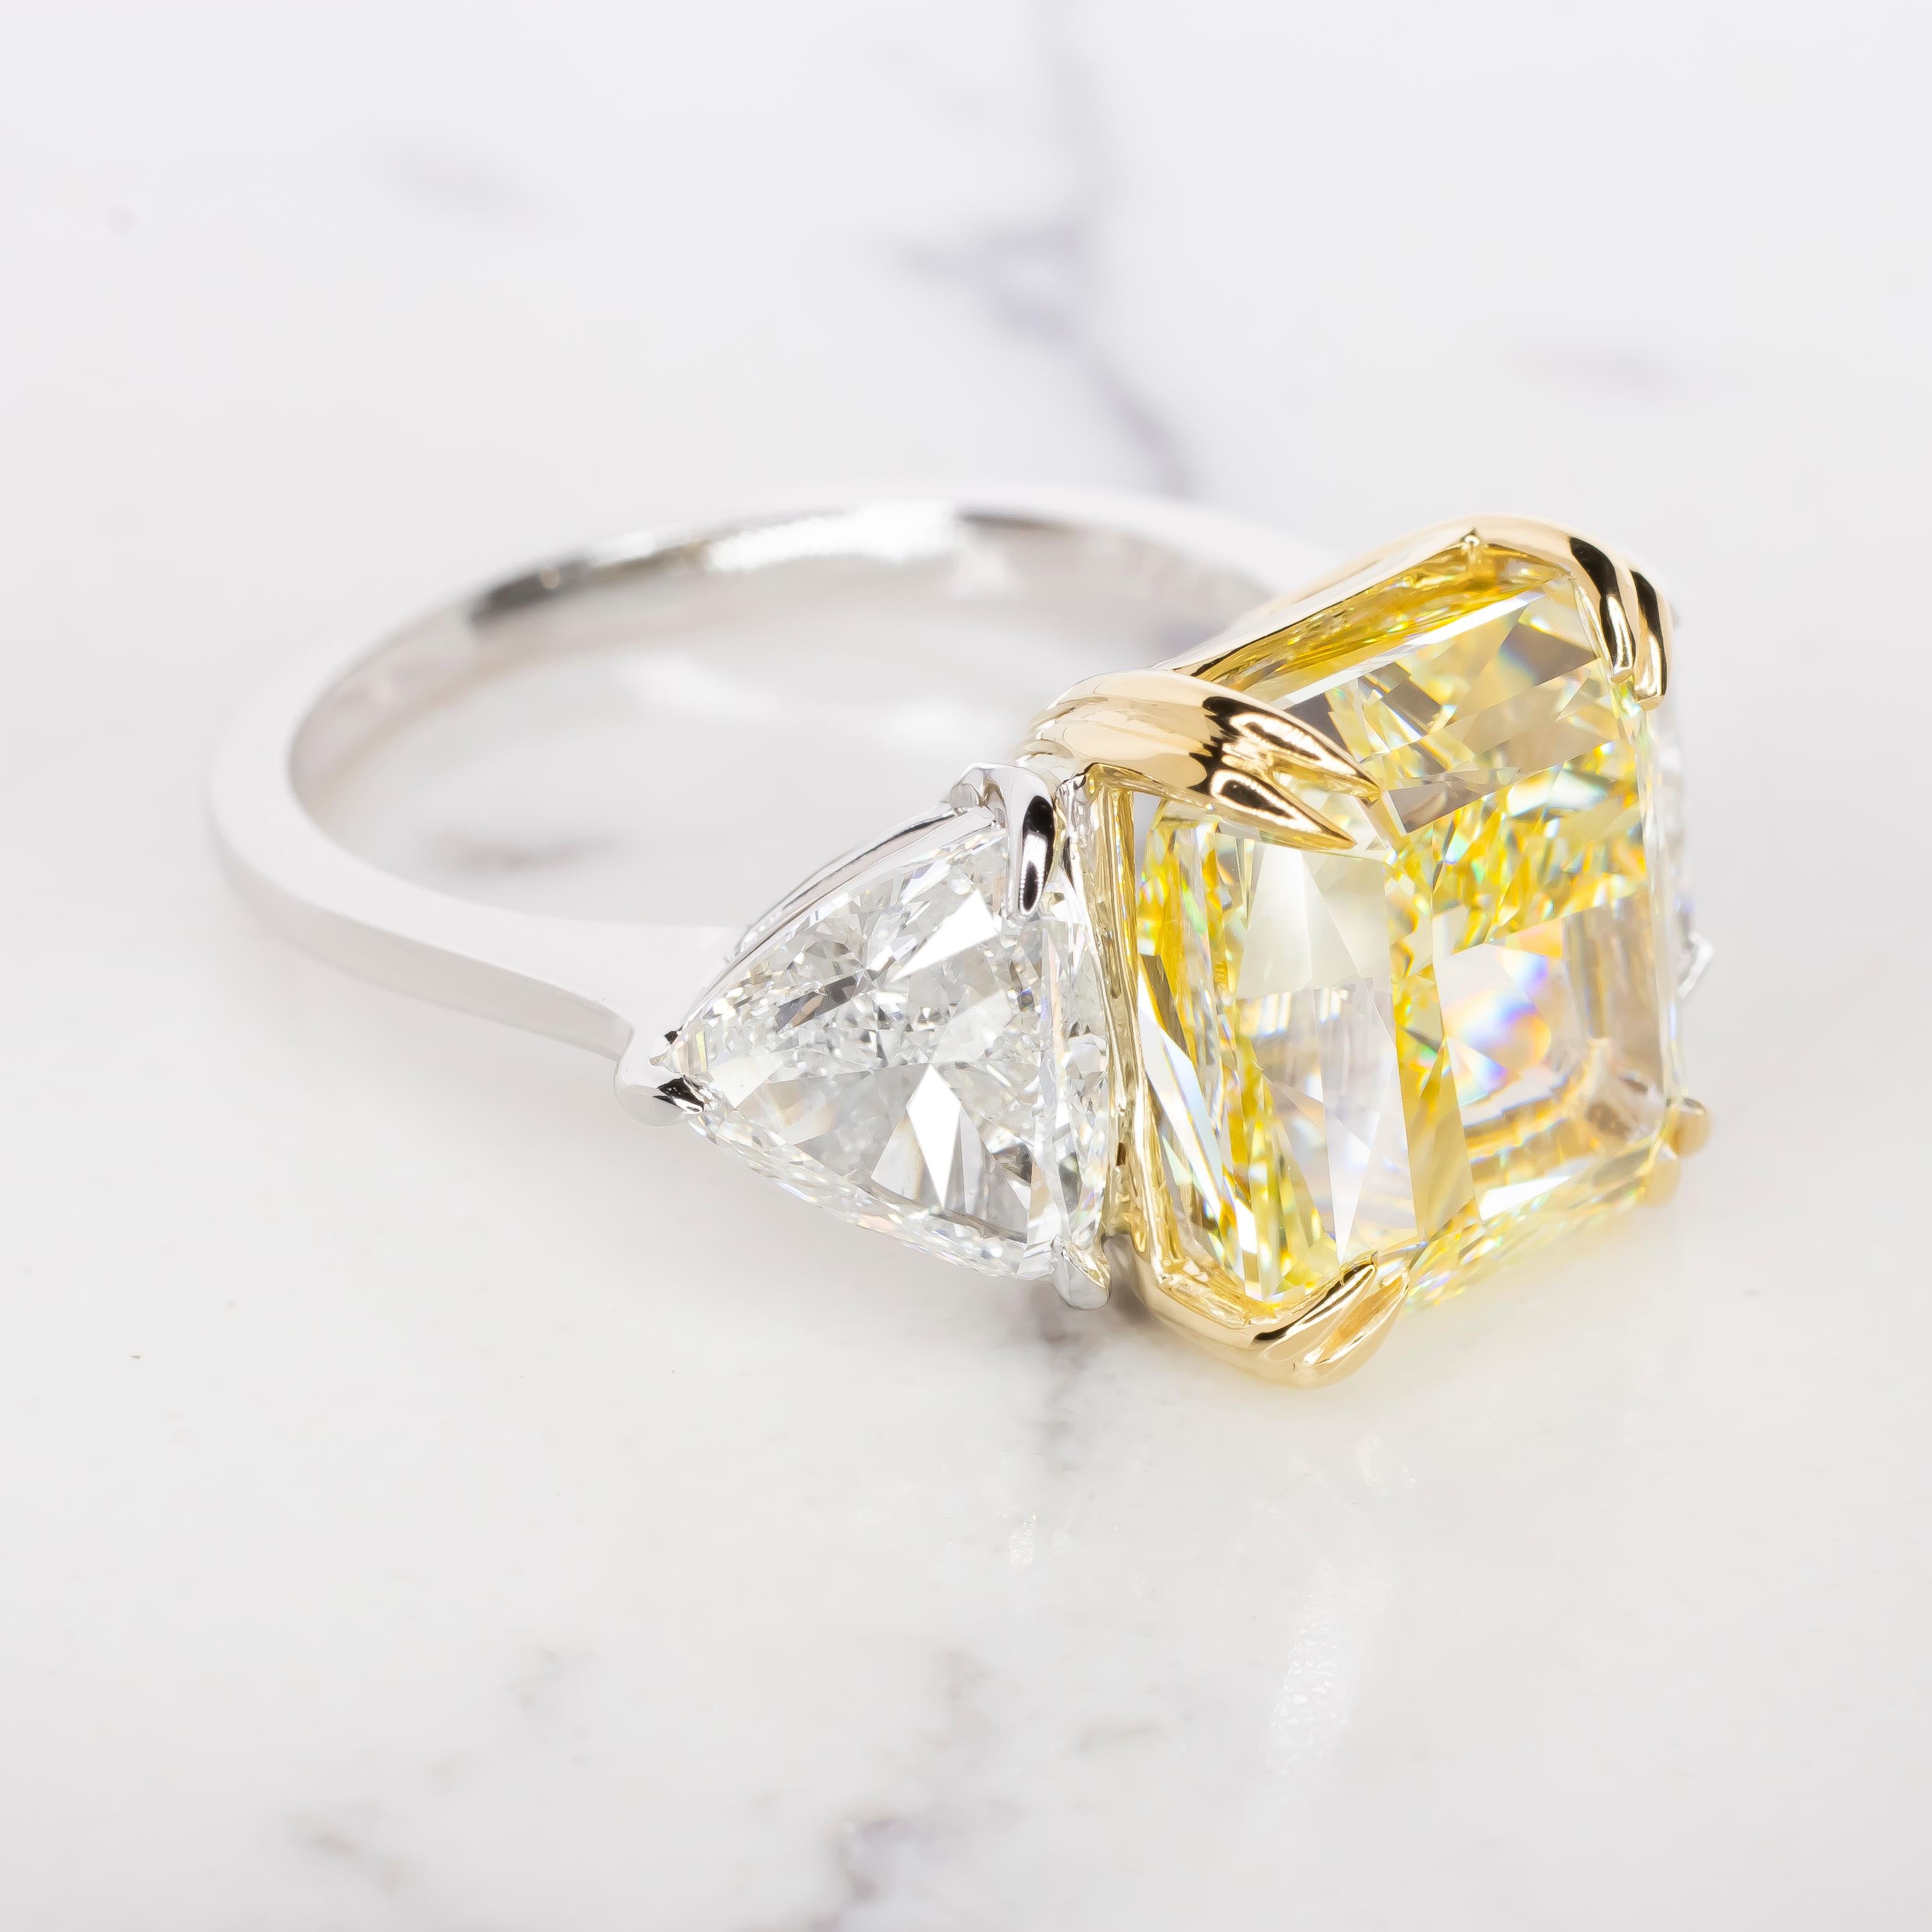 Radiate unparalleled elegance and sophistication with this GIA Certified 10.57 Ct Fancy Yellow Diamond Ring accentuated by trillion-cut diamonds. At the heart of this exceptional ring gleams a captivating fancy yellow diamond, certified by the